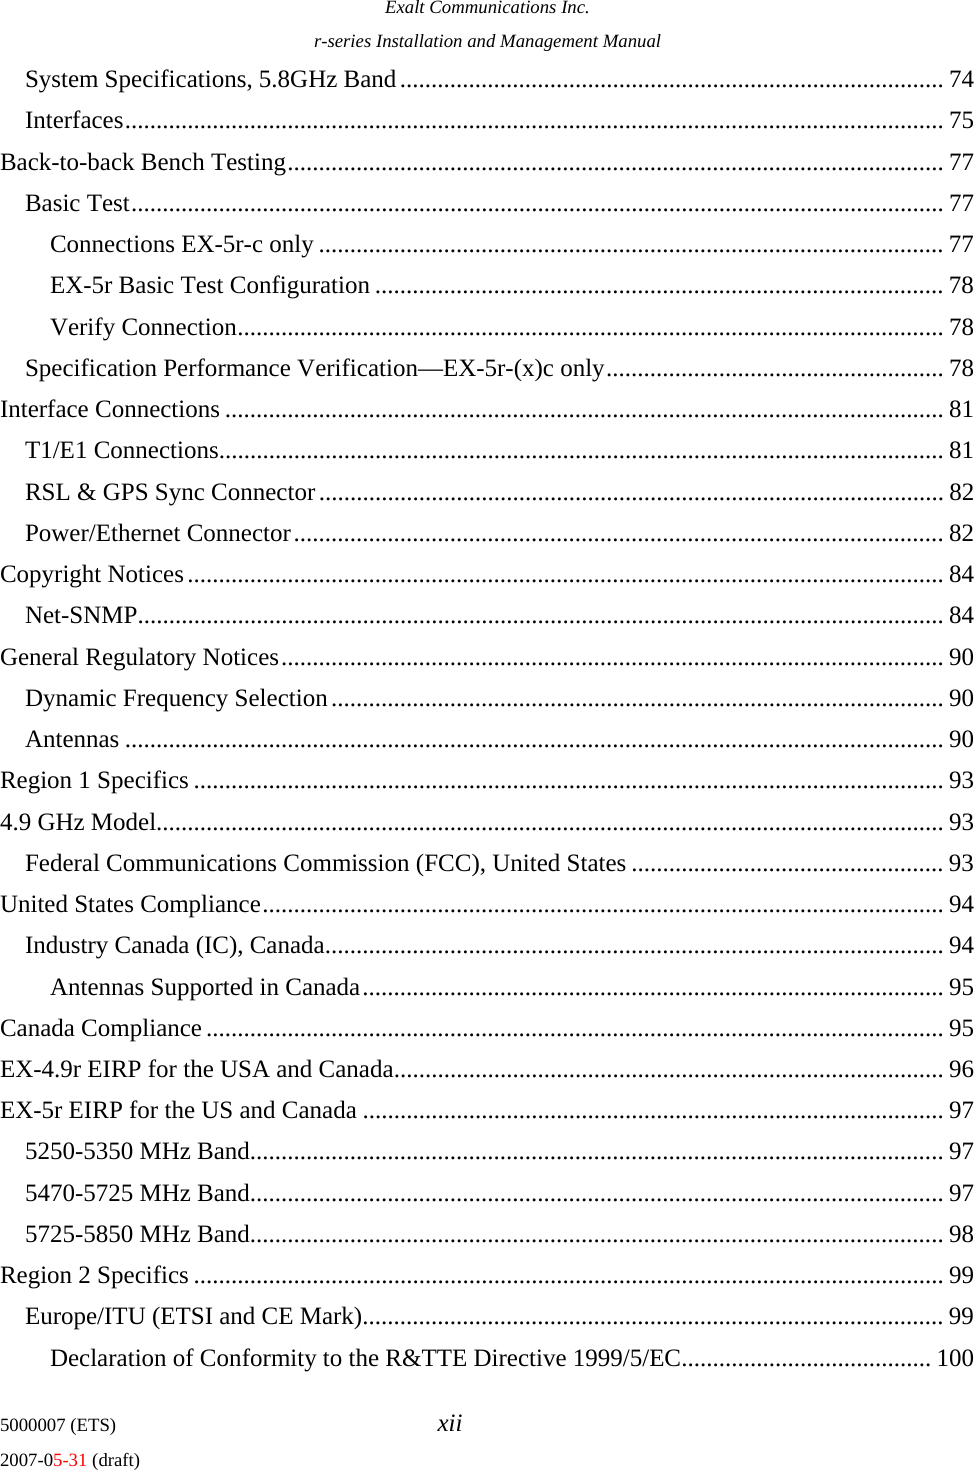 Exalt Communications Inc. r-series Installation and Management Manual 5000007 (ETS)  xii 2007-05-31 (draft) System Specifications, 5.8GHz Band....................................................................................... 74 Interfaces................................................................................................................................... 75 Back-to-back Bench Testing......................................................................................................... 77 Basic Test.................................................................................................................................. 77 Connections EX-5r-c only .................................................................................................... 77 EX-5r Basic Test Configuration ........................................................................................... 78 Verify Connection................................................................................................................. 78 Specification Performance Verification—EX-5r-(x)c only...................................................... 78 Interface Connections ................................................................................................................... 81 T1/E1 Connections.................................................................................................................... 81 RSL &amp; GPS Sync Connector.................................................................................................... 82 Power/Ethernet Connector........................................................................................................ 82 Copyright Notices......................................................................................................................... 84 Net-SNMP................................................................................................................................. 84 General Regulatory Notices.......................................................................................................... 90 Dynamic Frequency Selection.................................................................................................. 90 Antennas ................................................................................................................................... 90 Region 1 Specifics ........................................................................................................................ 93 4.9 GHz Model.............................................................................................................................. 93 Federal Communications Commission (FCC), United States .................................................. 93 United States Compliance............................................................................................................. 94 Industry Canada (IC), Canada................................................................................................... 94 Antennas Supported in Canada............................................................................................. 95 Canada Compliance ...................................................................................................................... 95 EX-4.9r EIRP for the USA and Canada........................................................................................ 96 EX-5r EIRP for the US and Canada ............................................................................................. 97 5250-5350 MHz Band............................................................................................................... 97 5470-5725 MHz Band............................................................................................................... 97 5725-5850 MHz Band............................................................................................................... 98 Region 2 Specifics ........................................................................................................................ 99 Europe/ITU (ETSI and CE Mark)............................................................................................. 99 Declaration of Conformity to the R&amp;TTE Directive 1999/5/EC........................................ 100 